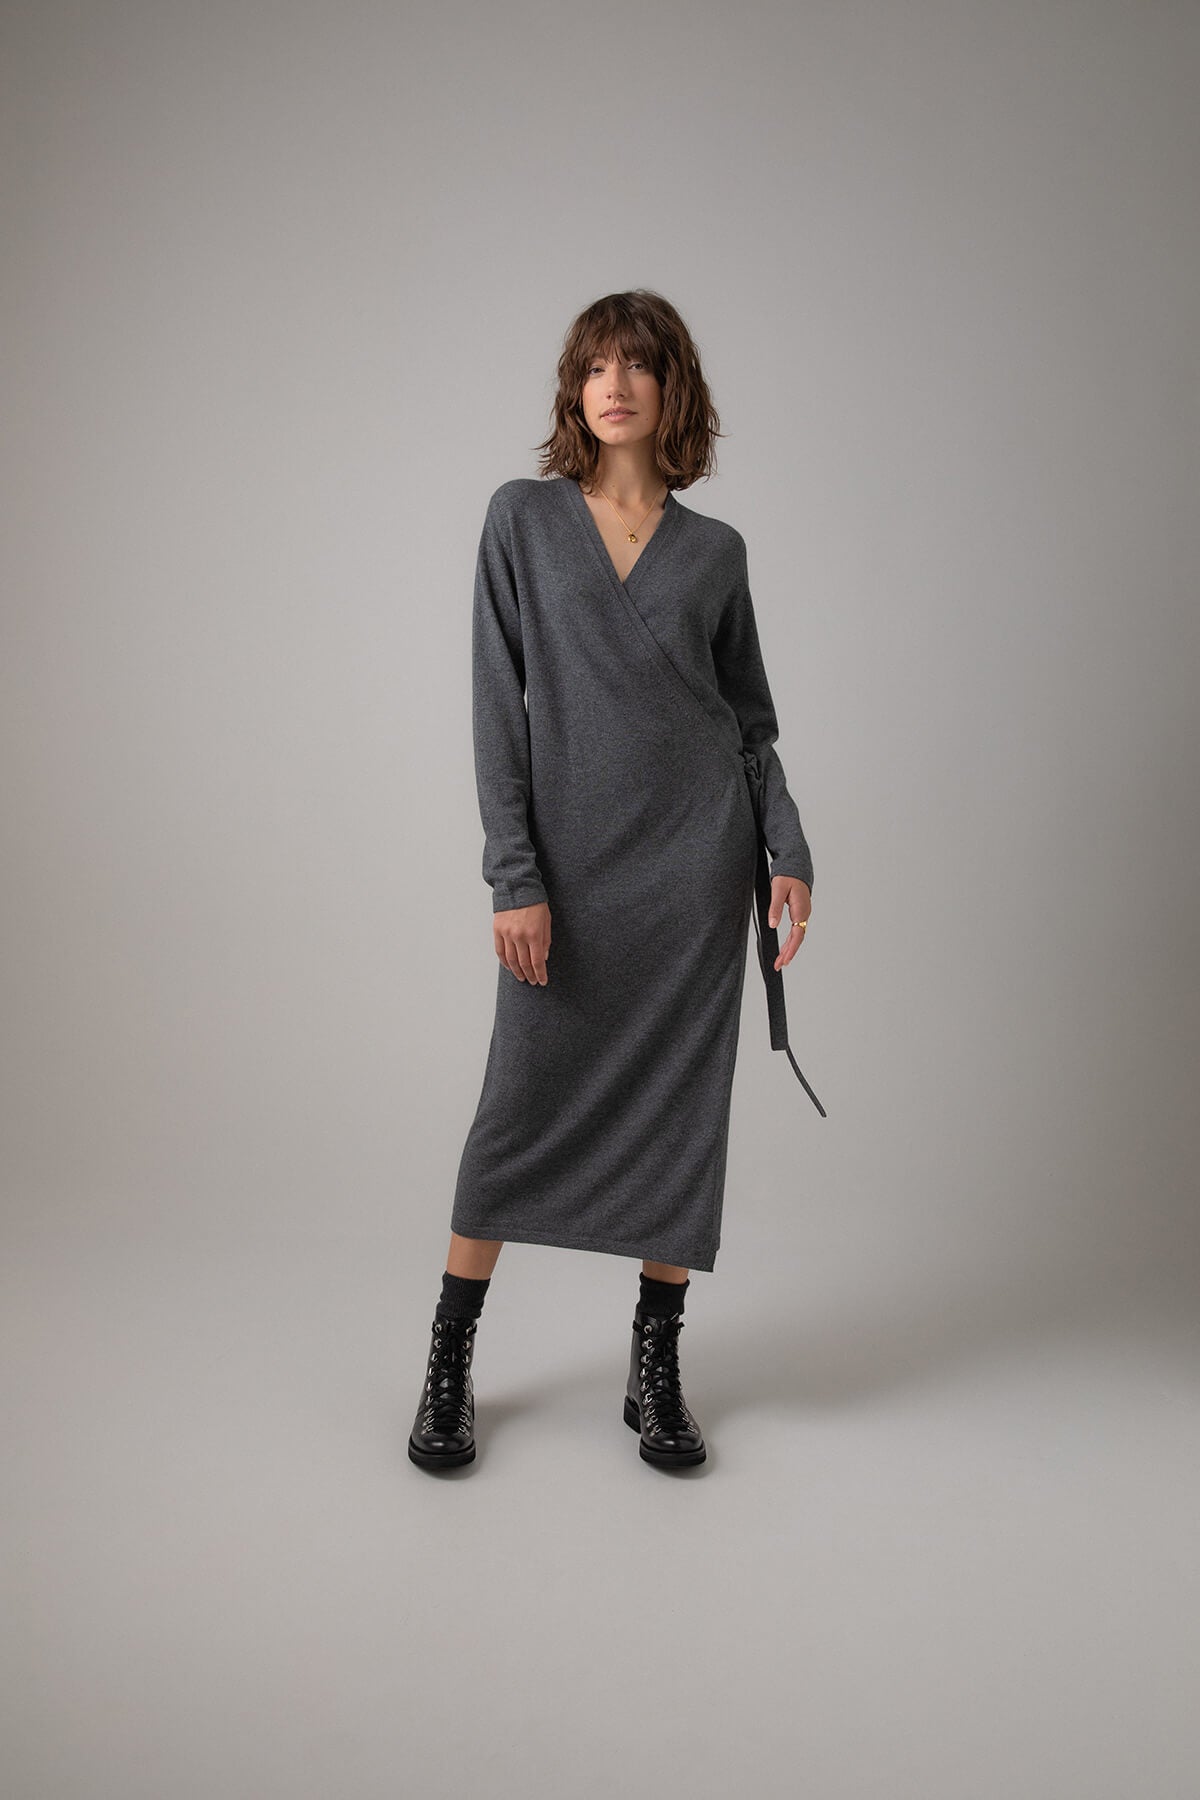 Johnstons of Elgin Ballet Wrap Cashmere Dress in Mid Grey worn with Cashmere Socks & Shoes on a grey background KAP05047HA4181